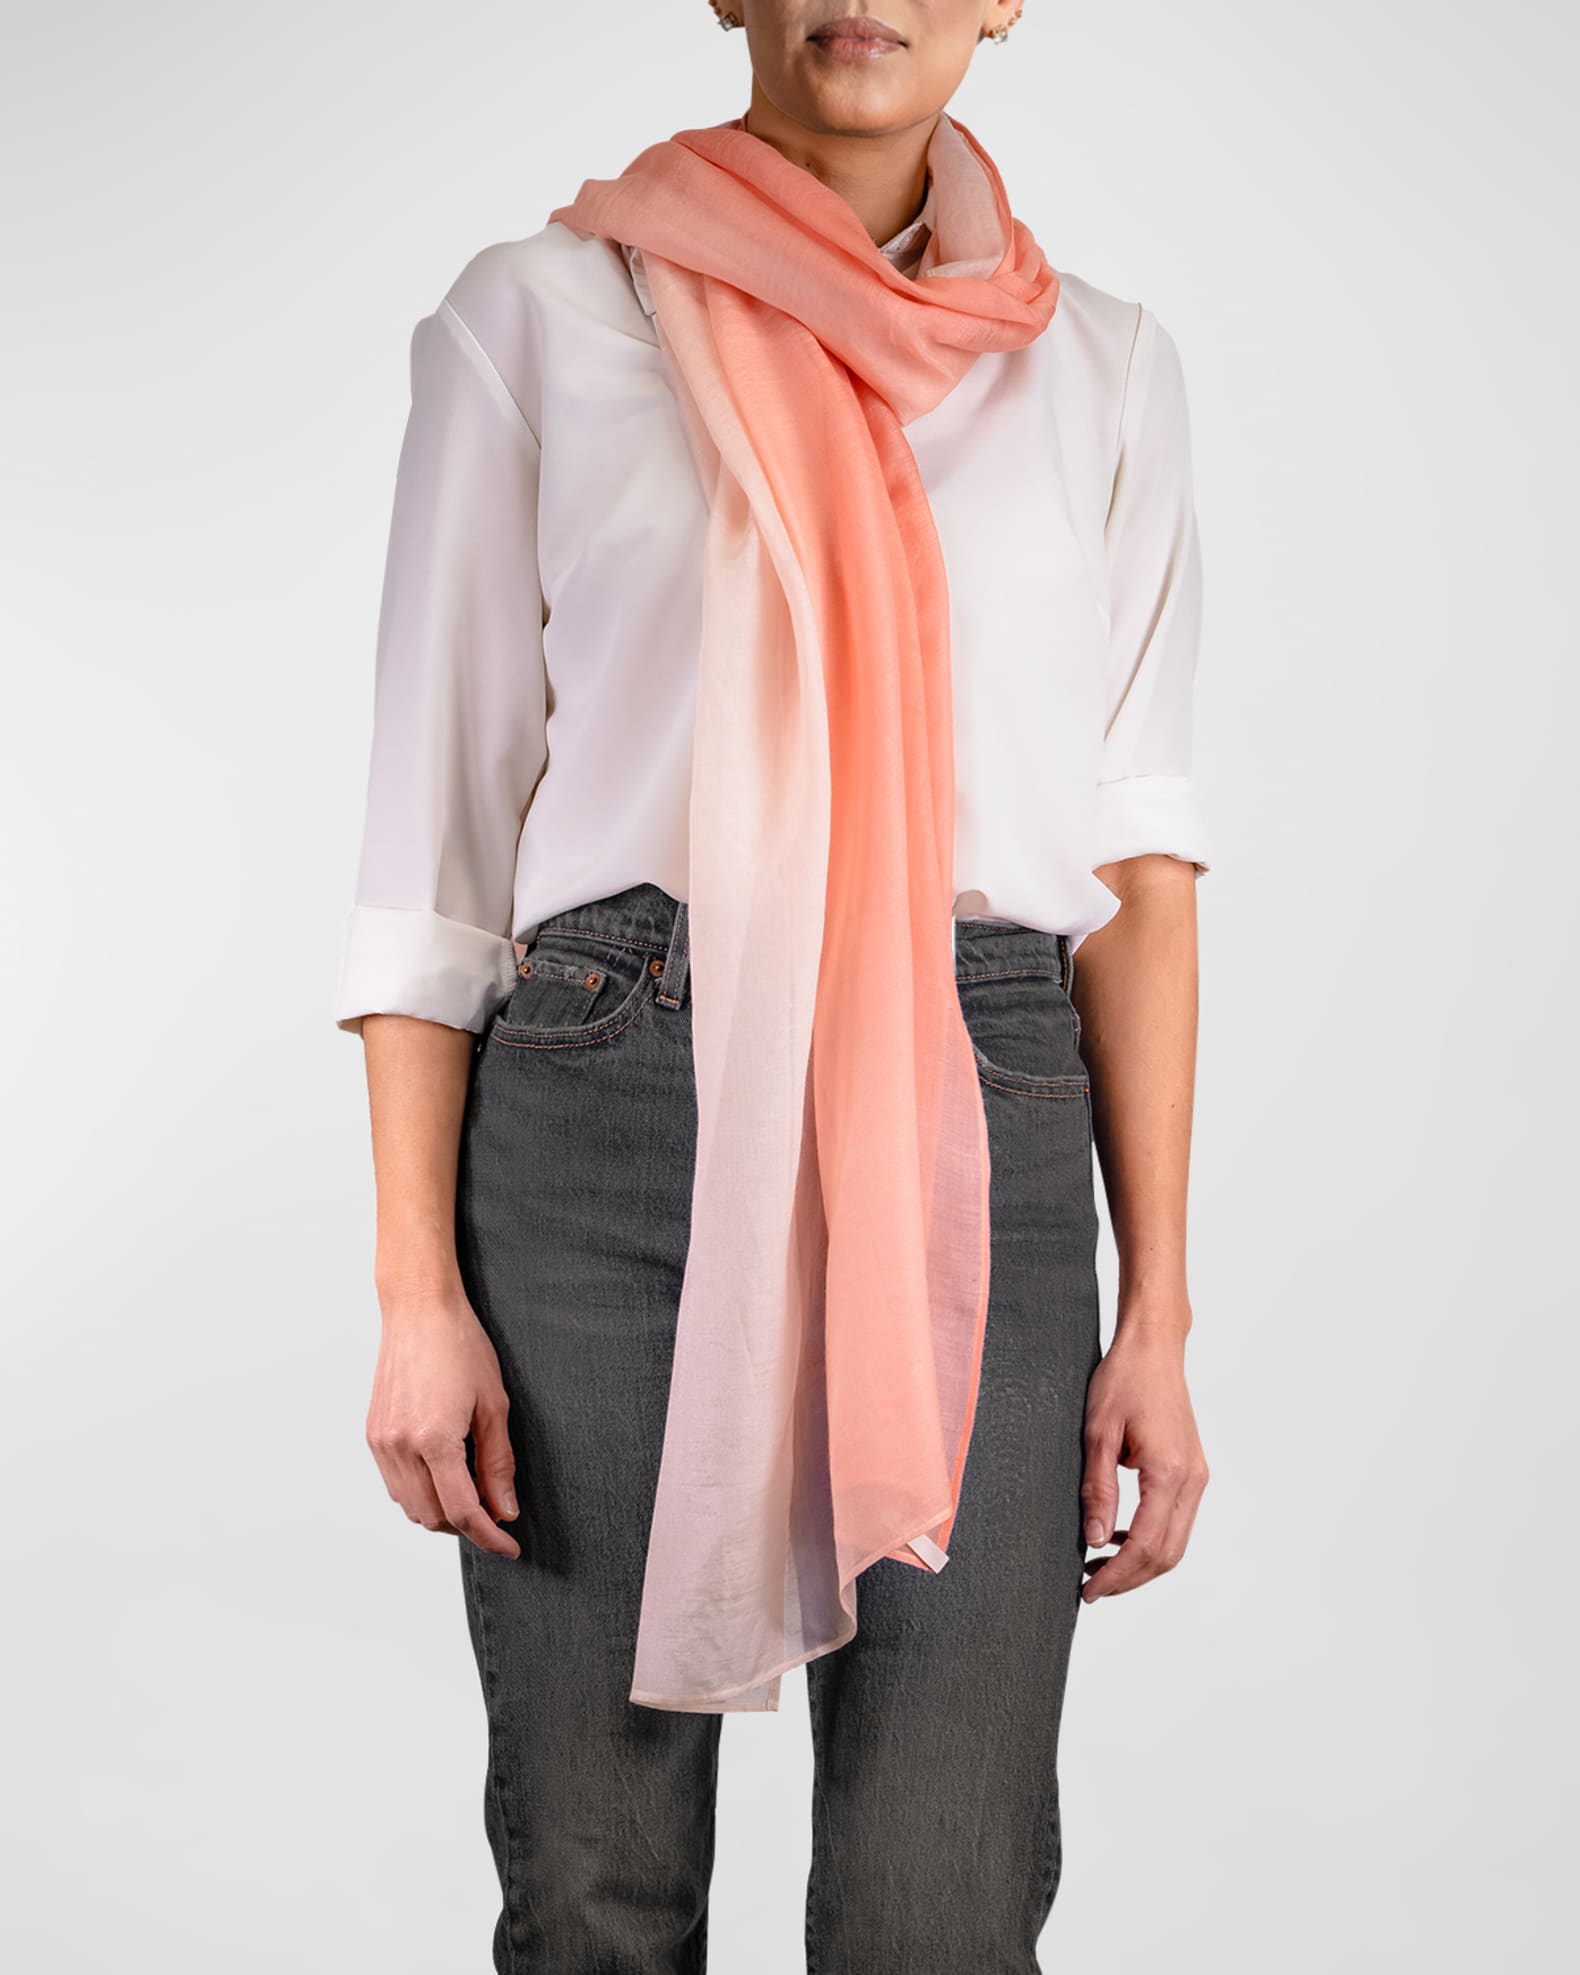 Pink and Orange Ombre Silk Cashmere Scarf